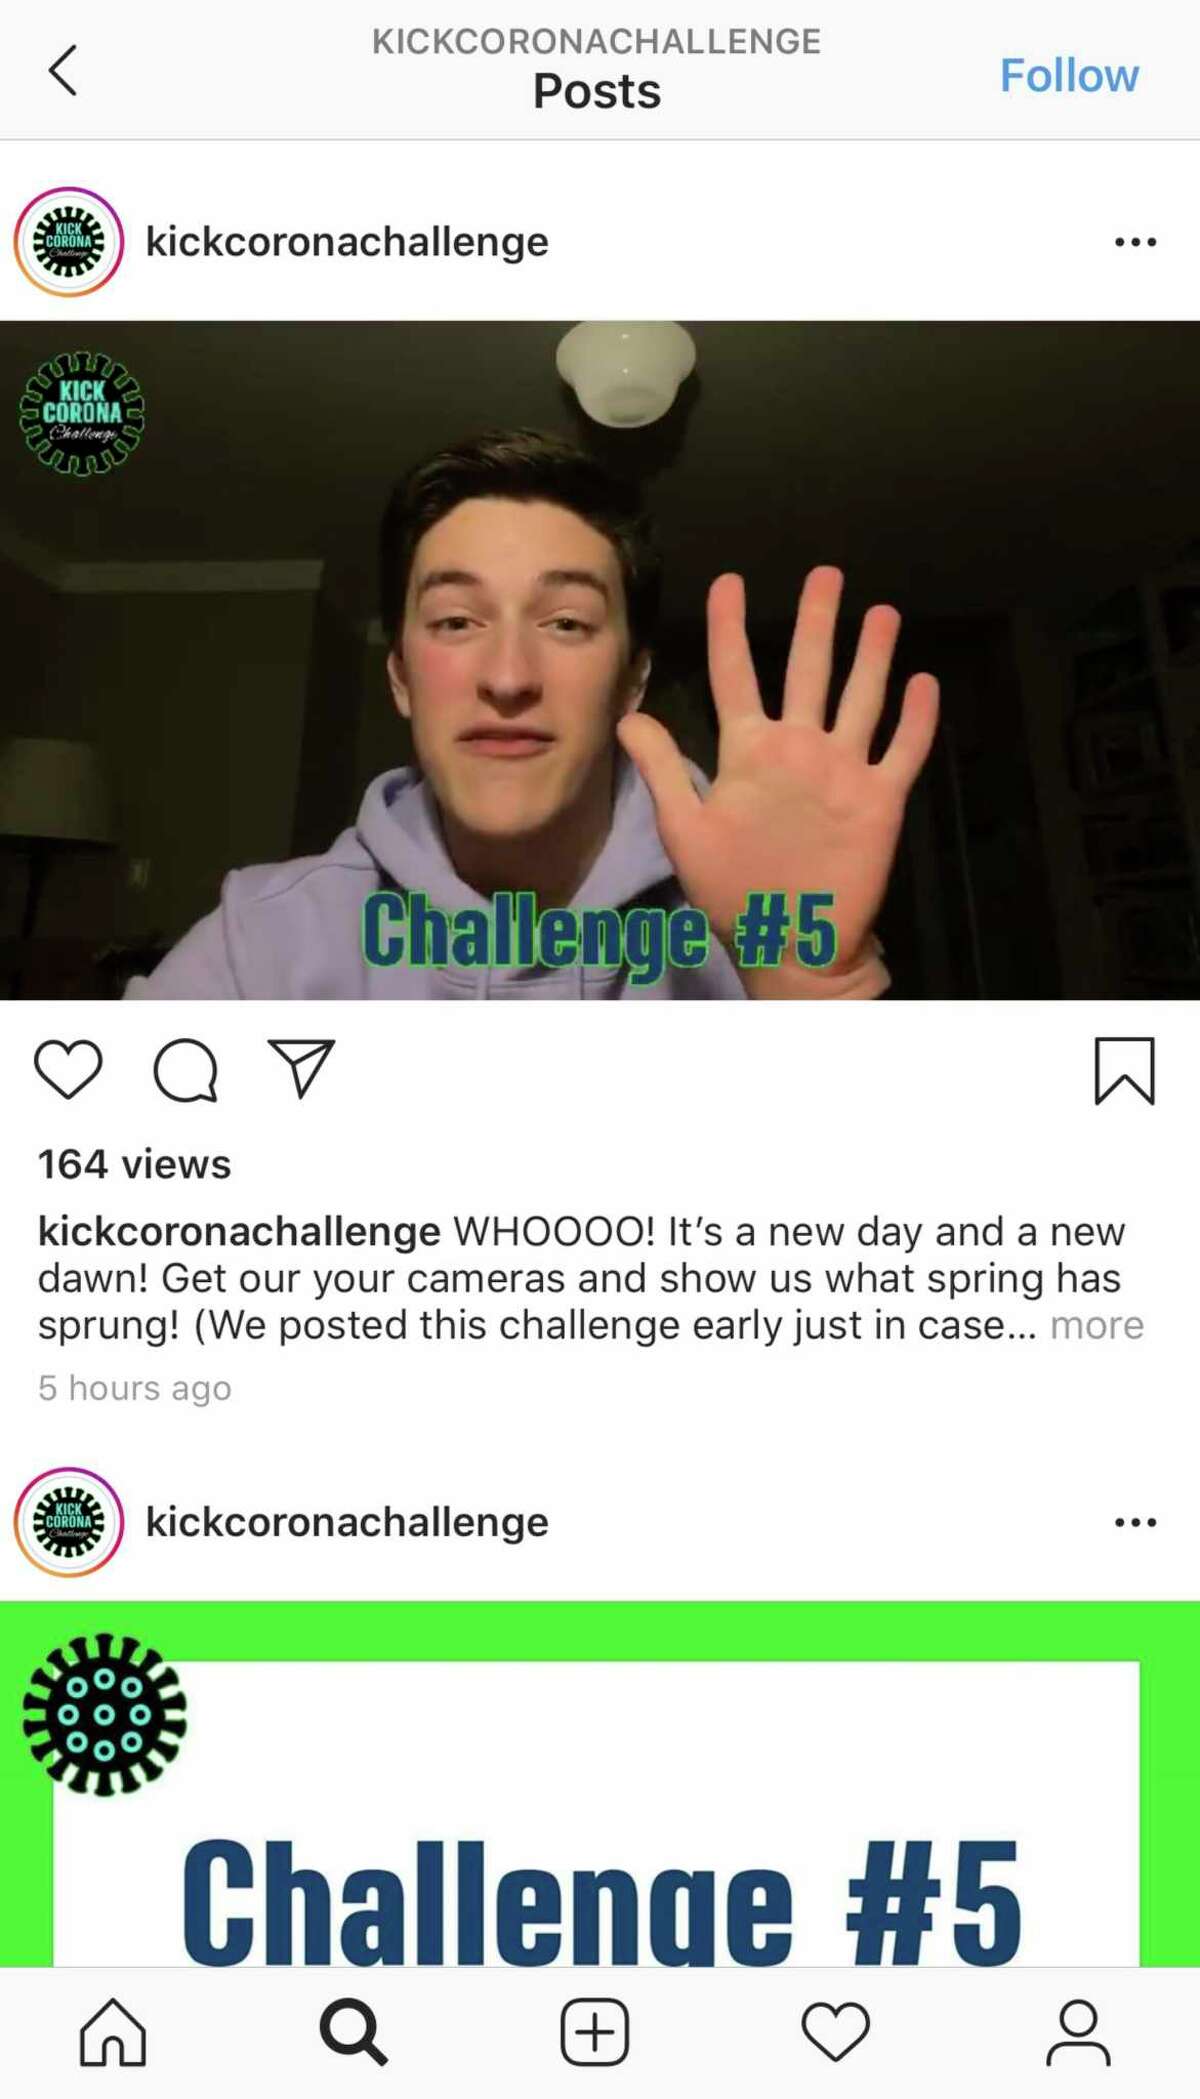 Two Shepaug Valley School students, Lily Schur and Henry James, have started the Kick Corona Challenge, an Instagram account that posts a daily challenge and is designed to inspire people to think positively and cure their "cabin fever" while social distancing. Friday, March 20, 2020.